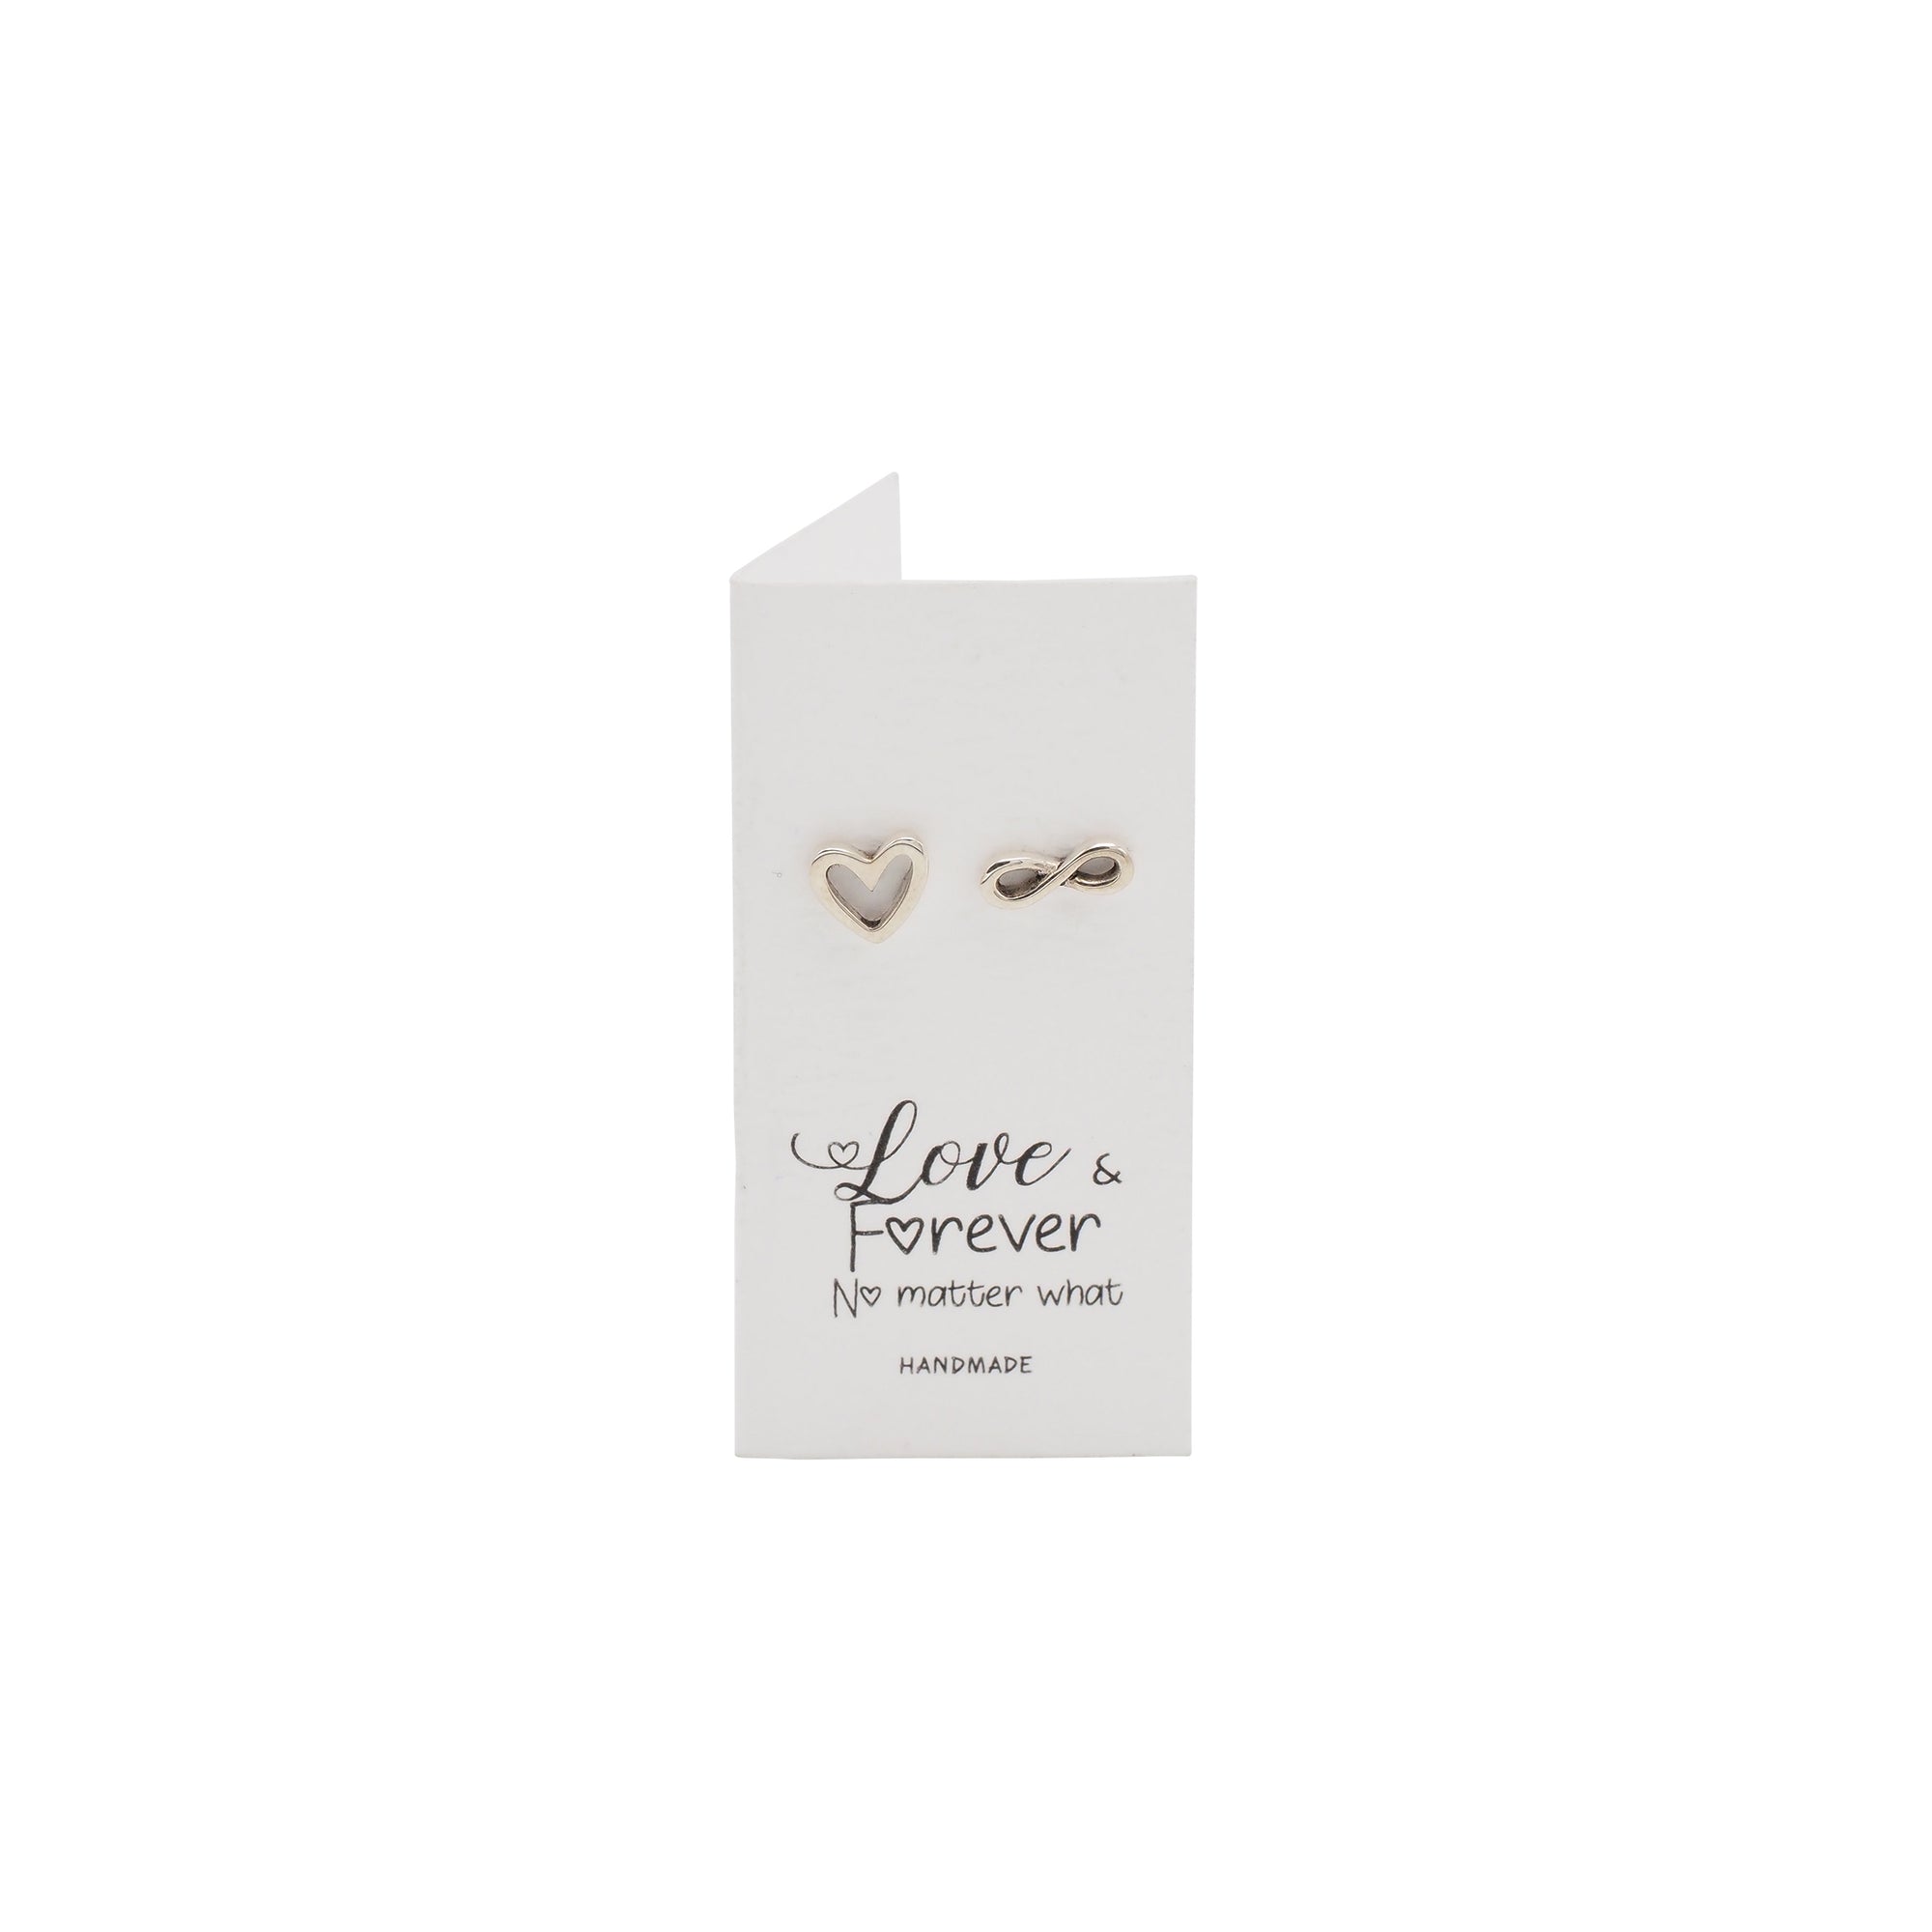 Dulce Heart and Infinity Earrings, Gifts for Women, Inspirational Quote Greeting Card, Silver Rhodium Plated